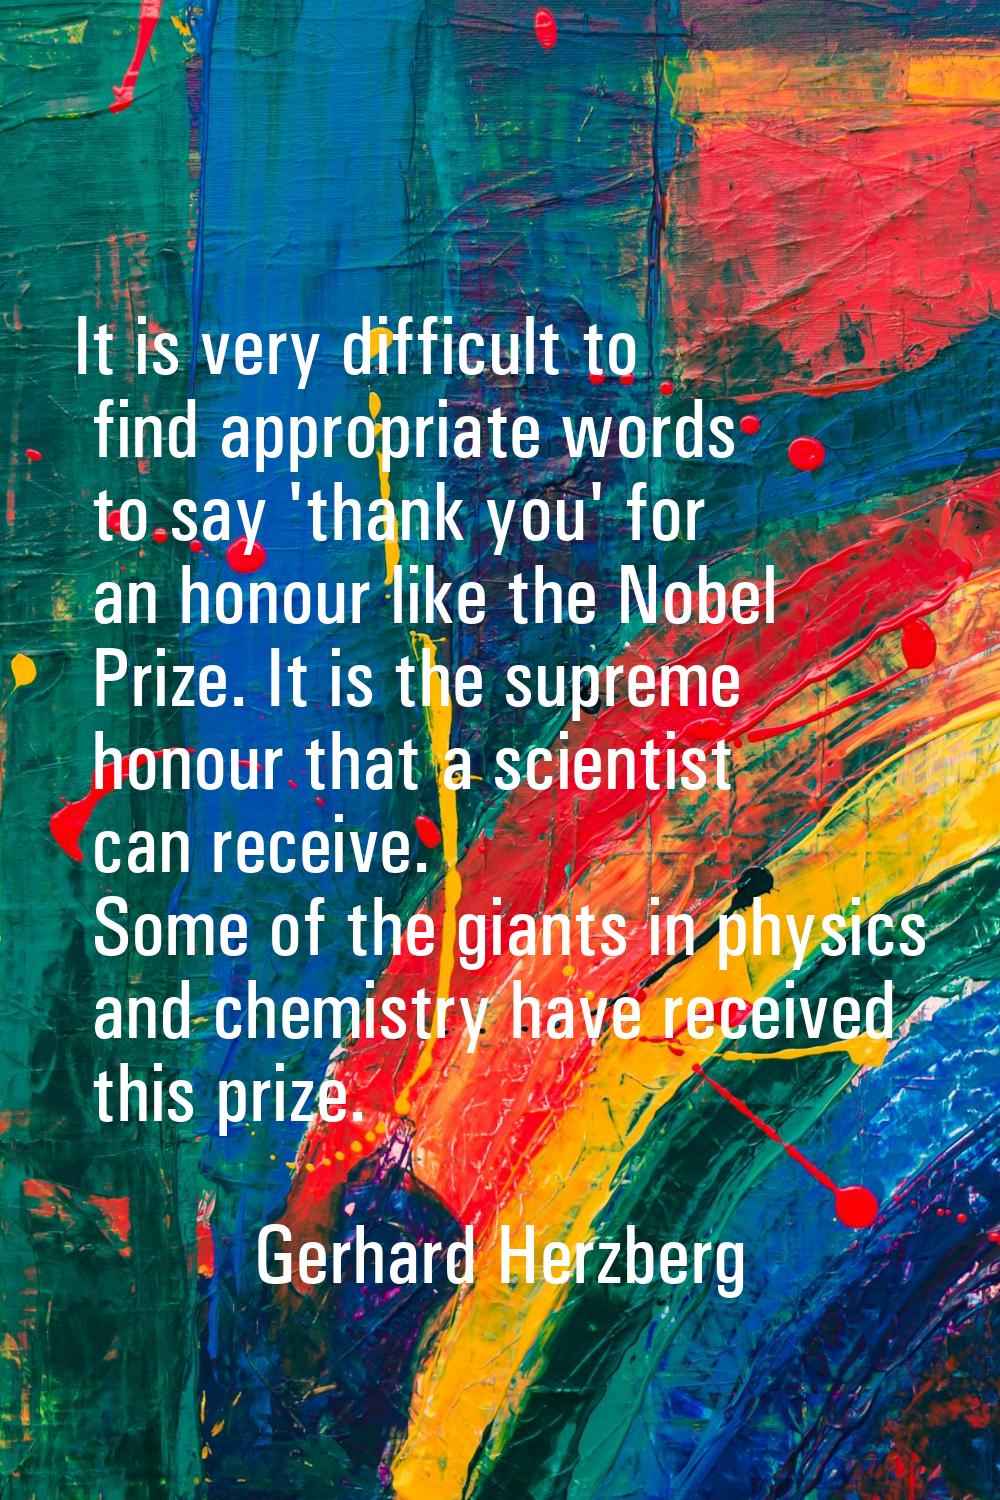 It is very difficult to find appropriate words to say 'thank you' for an honour like the Nobel Priz